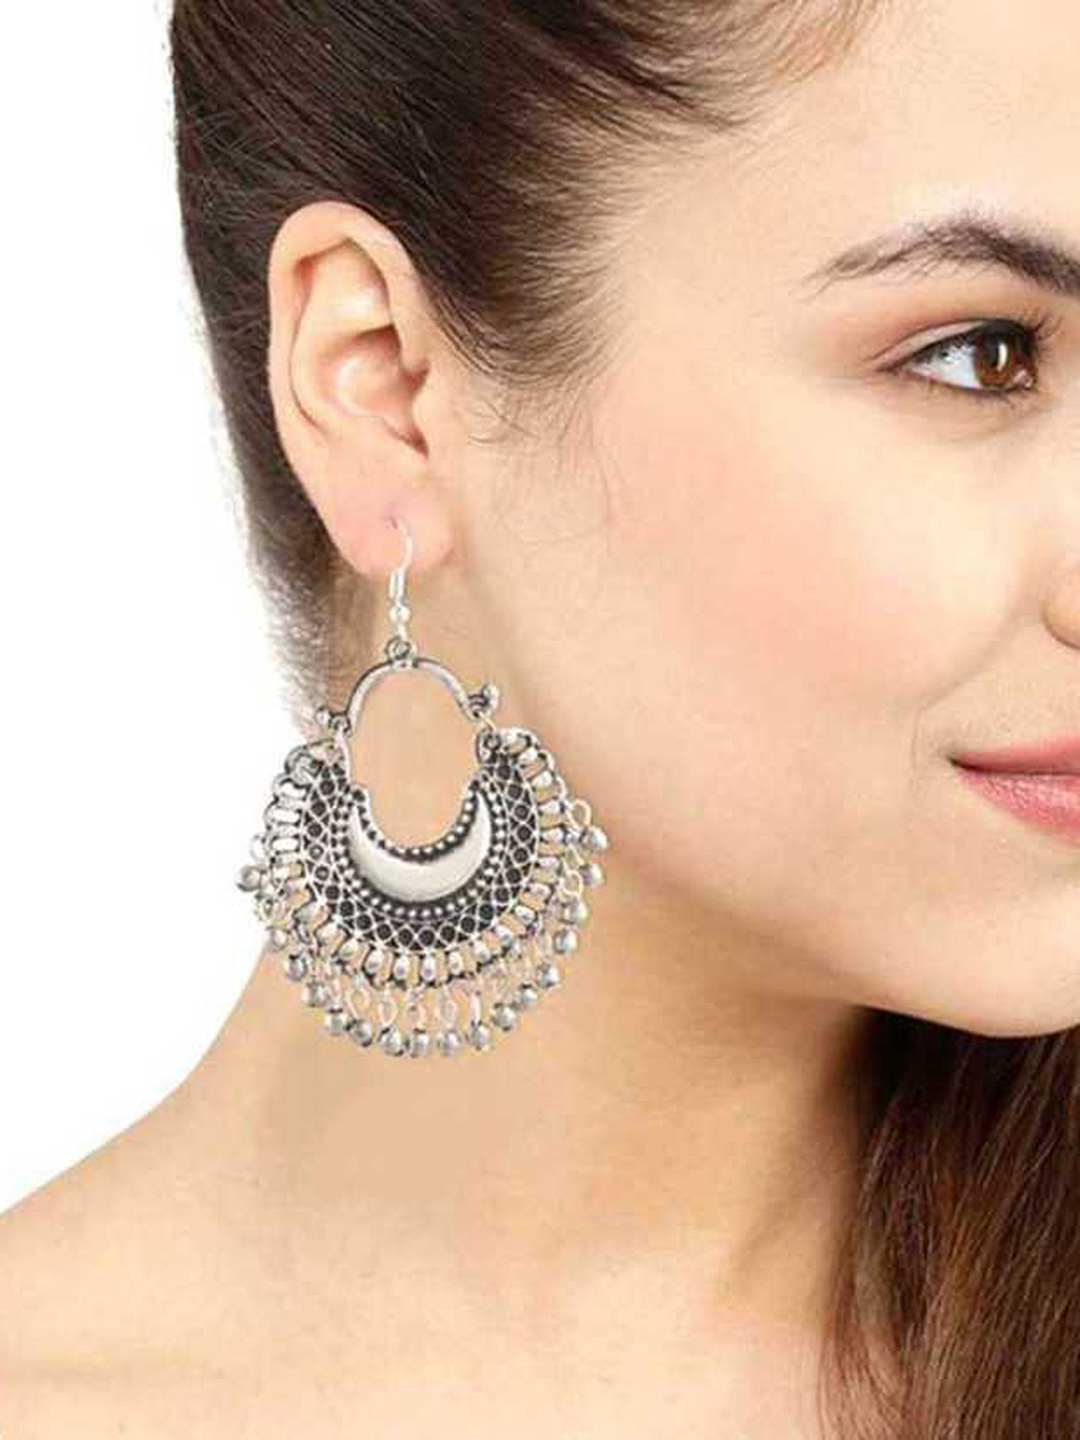 Oxidised Silver Half Moon Necklace With Hanging Jhumki